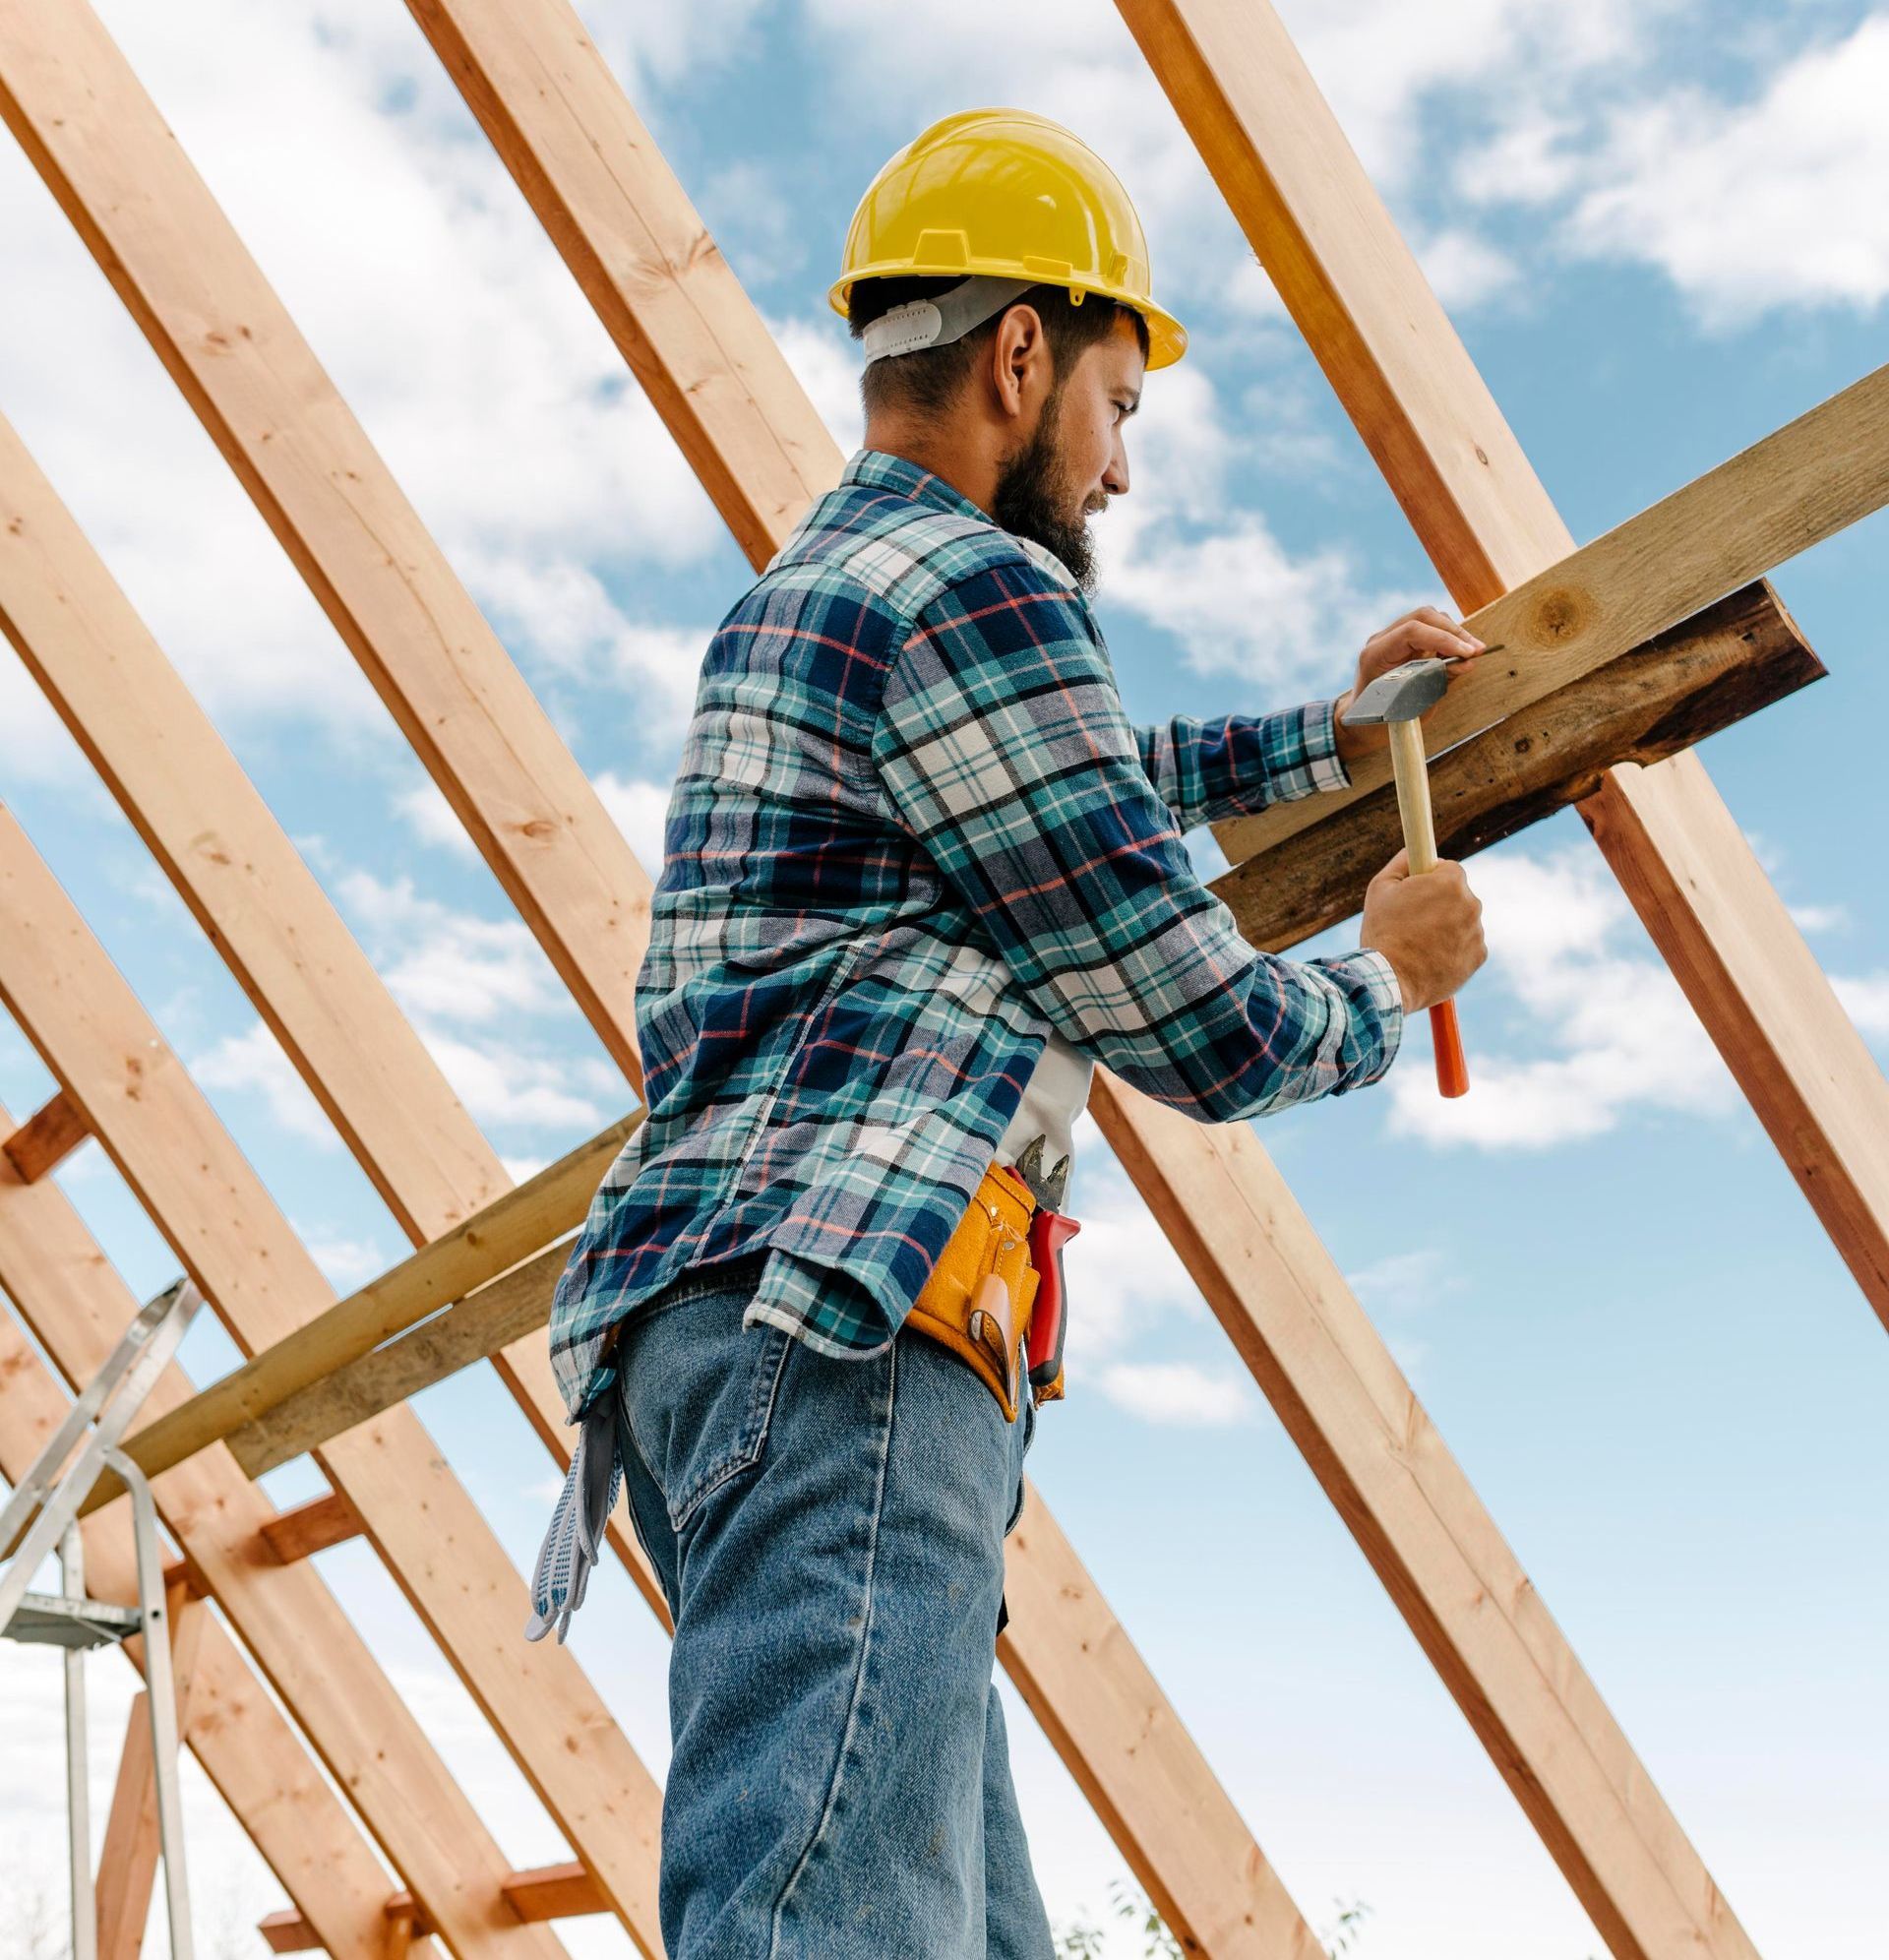 a man wearing a hard hat is working on a wooden structure .